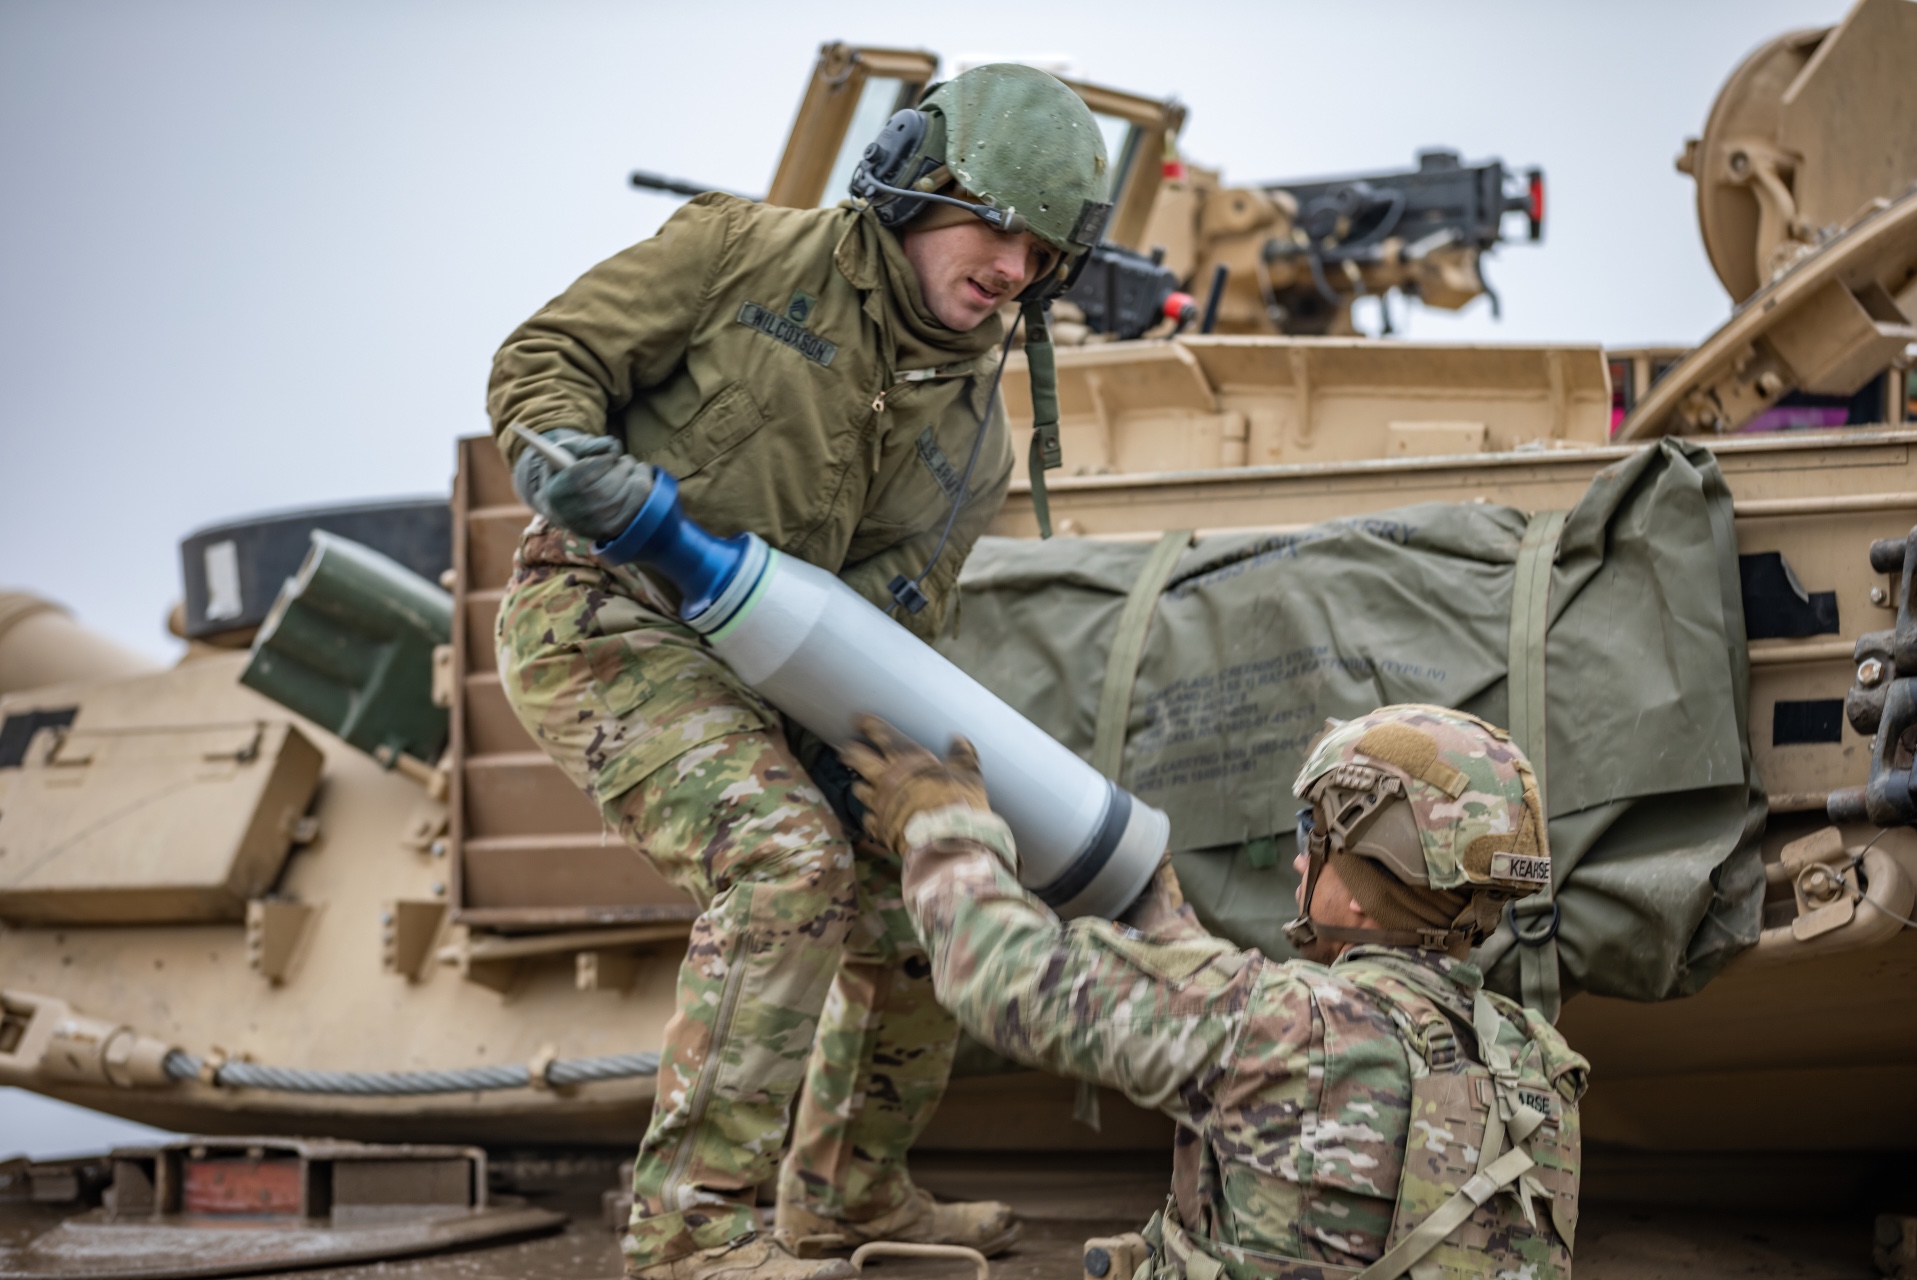 M1 armor crewmen assigned to Apache Company, 1st Battalion, 9th Cavalry Regiment, 2nd Armored Brigade Combat Team, 1st Cavalry Division, load ammunition onto a M1A2 Abrams tank during a live-fire exercise at Bemowo Piskie, Poland